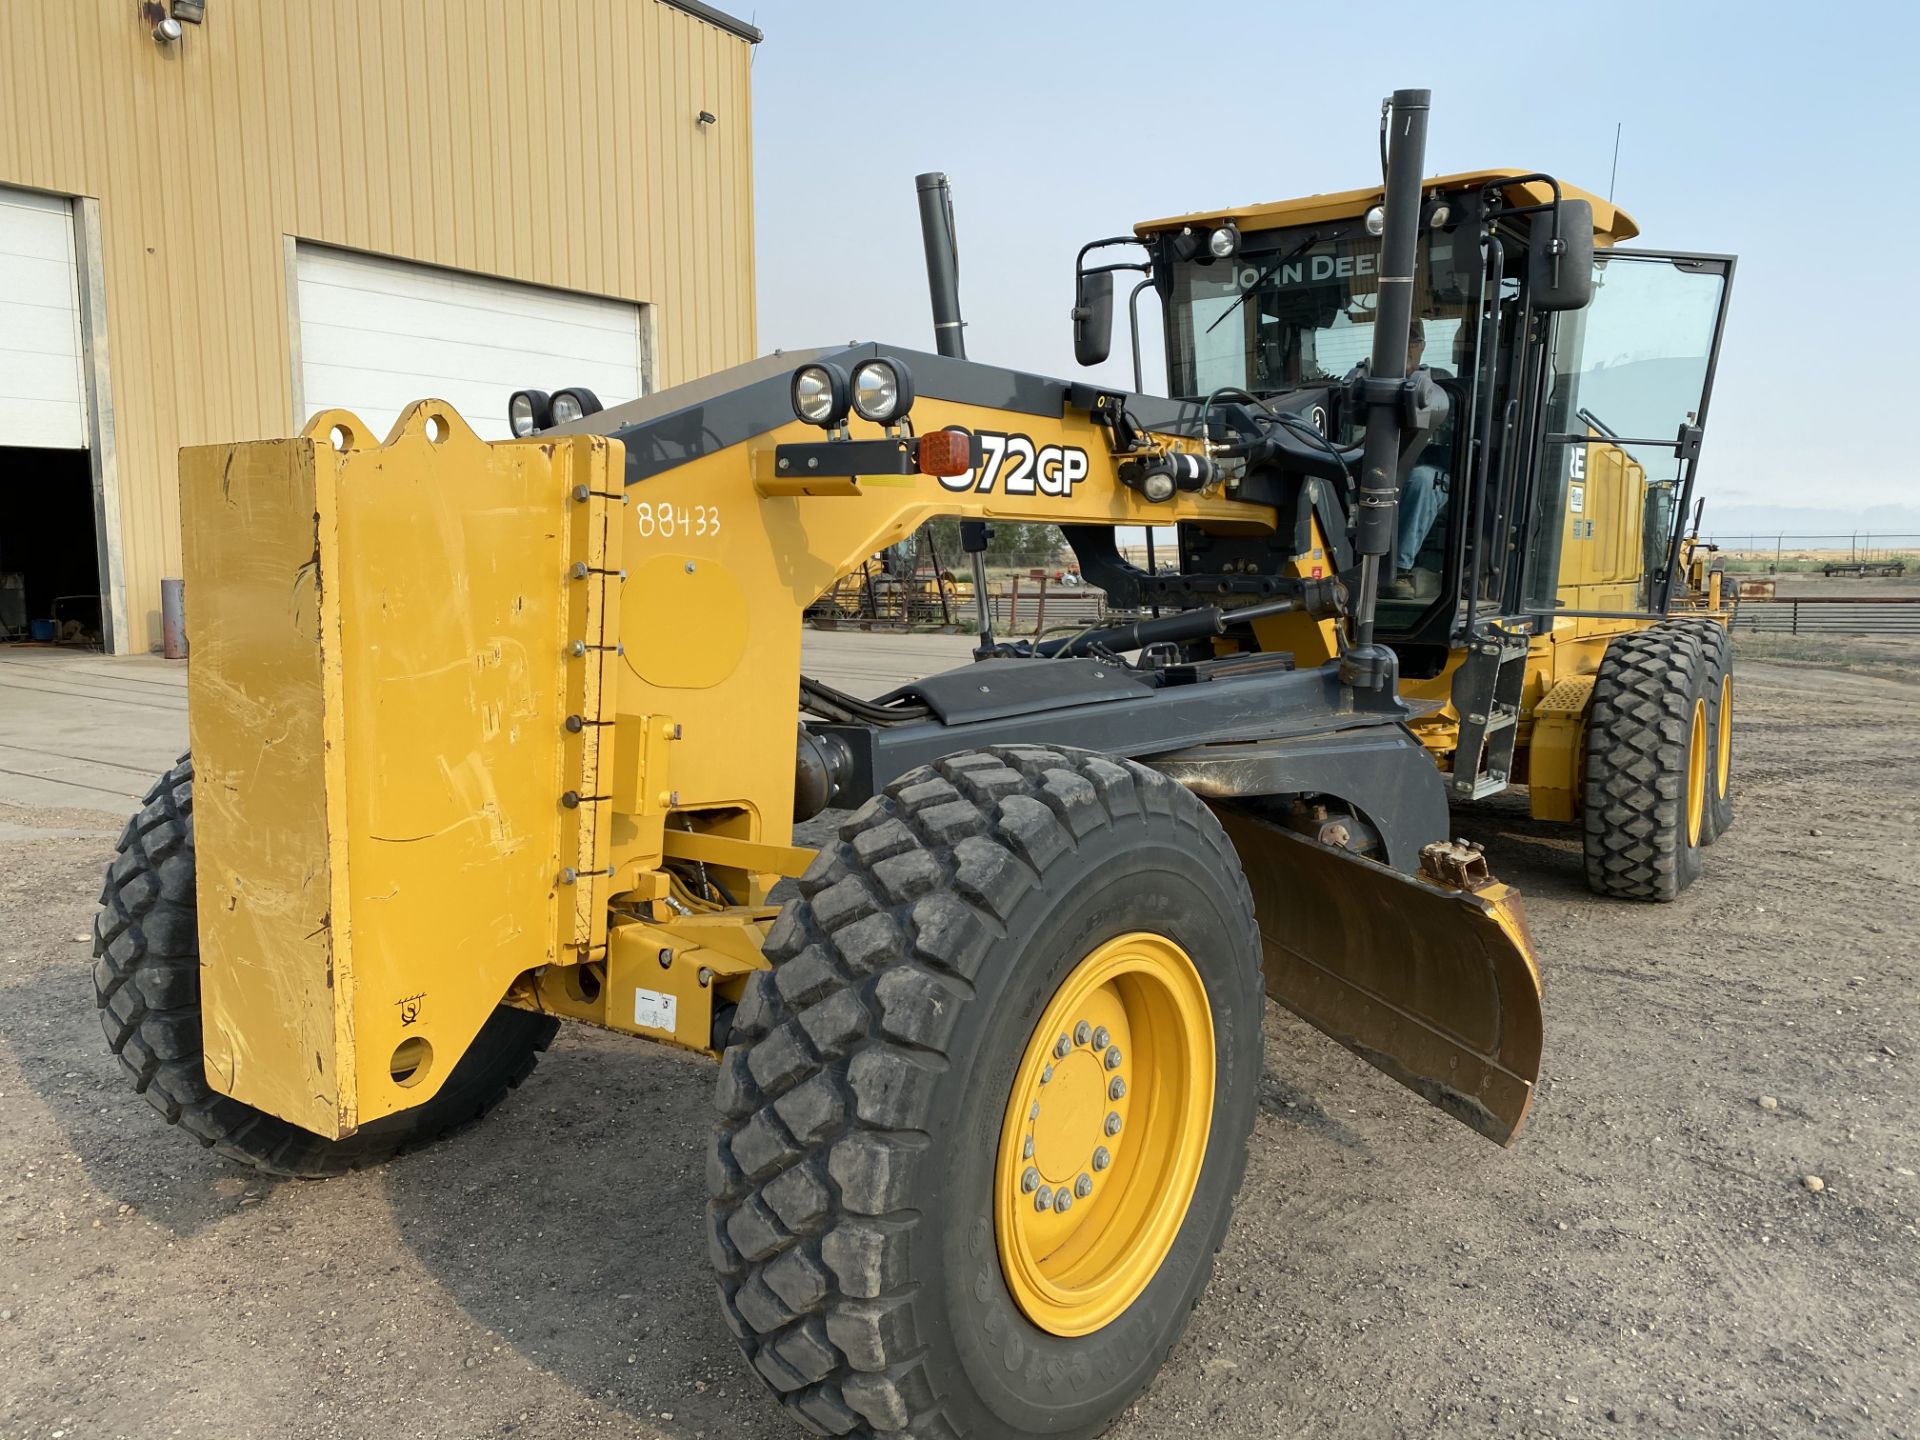 SOLD Prior to Auction -- NO LONGER AVAILABLE FOR SALE -- John Deere Grader, Year 2013, Model: 872GP - Image 2 of 28